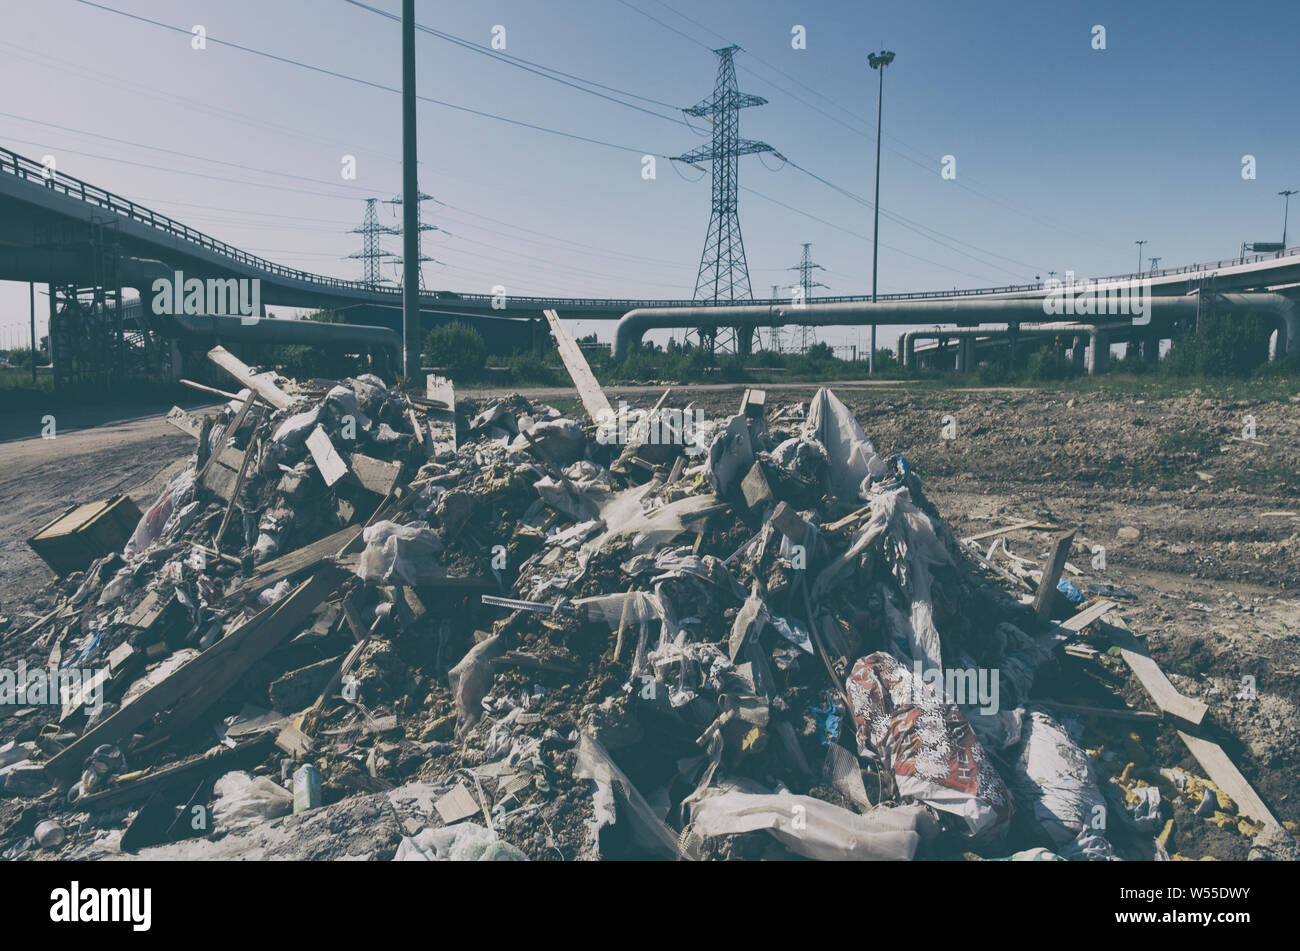 Pile of illegal dumped garbage in the city industrial zone on the background of high-voltage power lines Stock Photo